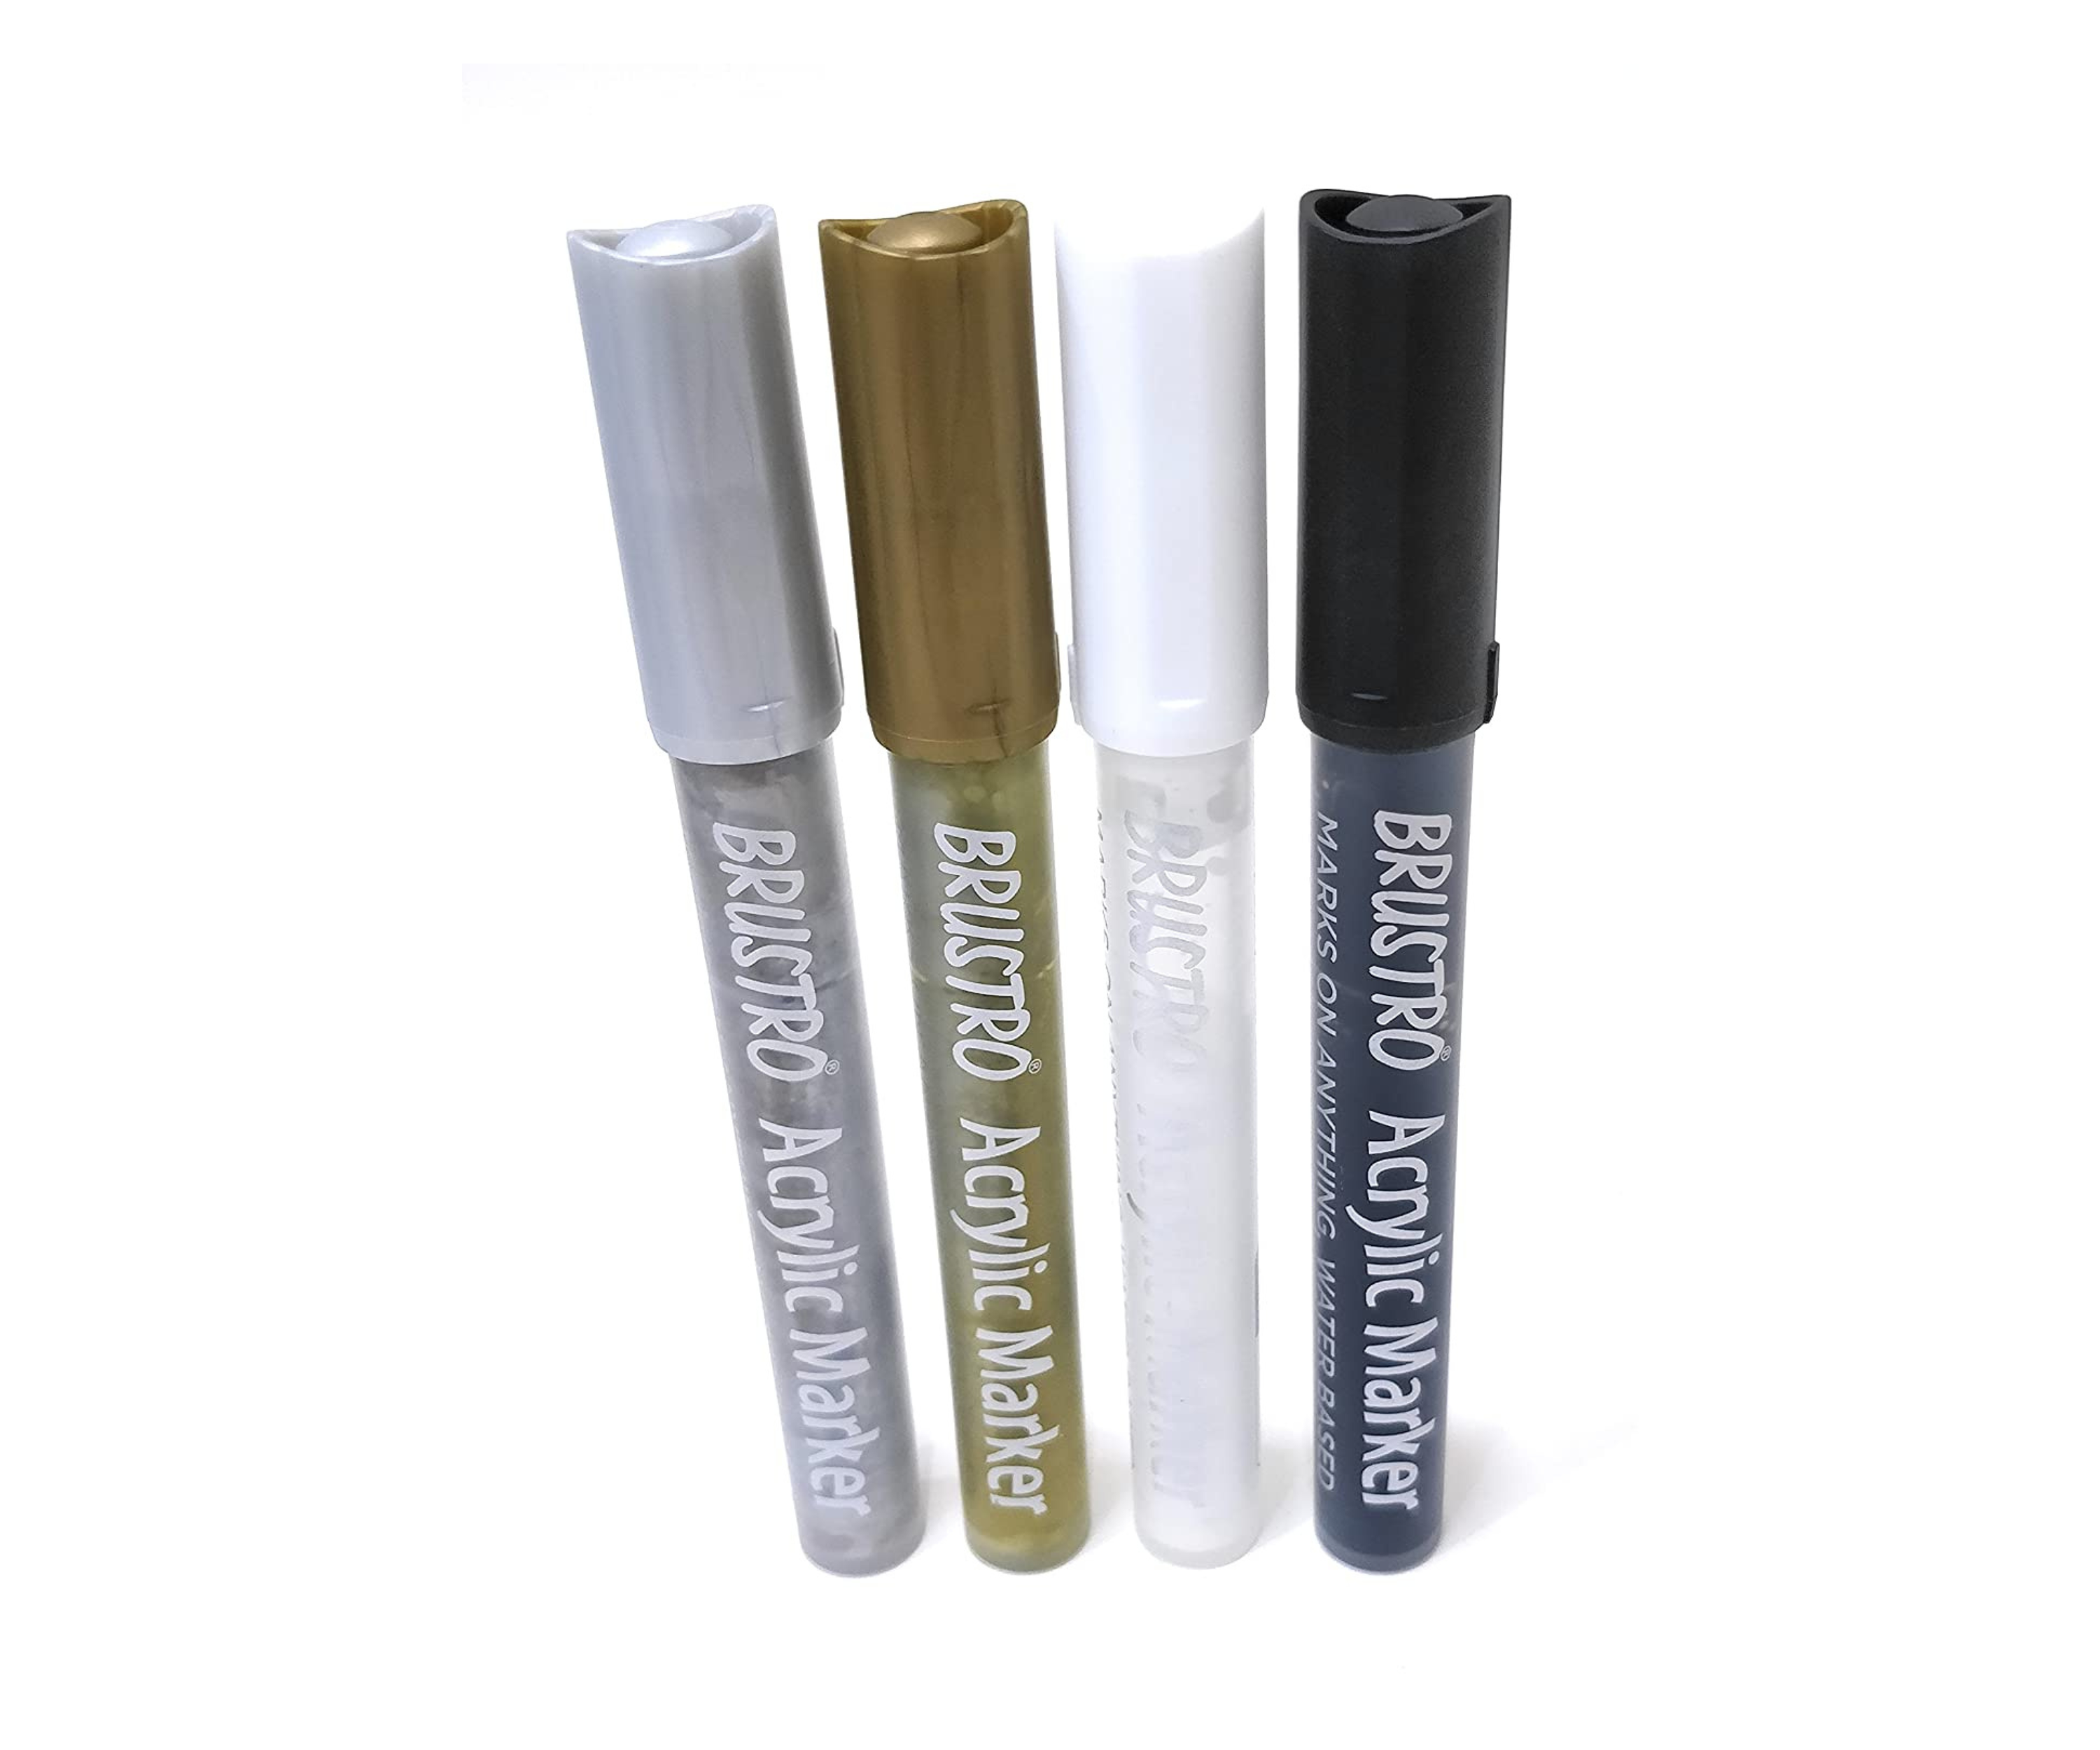 Brustro Acrylic DIY Marker Set of 4 - Gold, Silver, Black, and White/Buy  now ! – BrustroShop